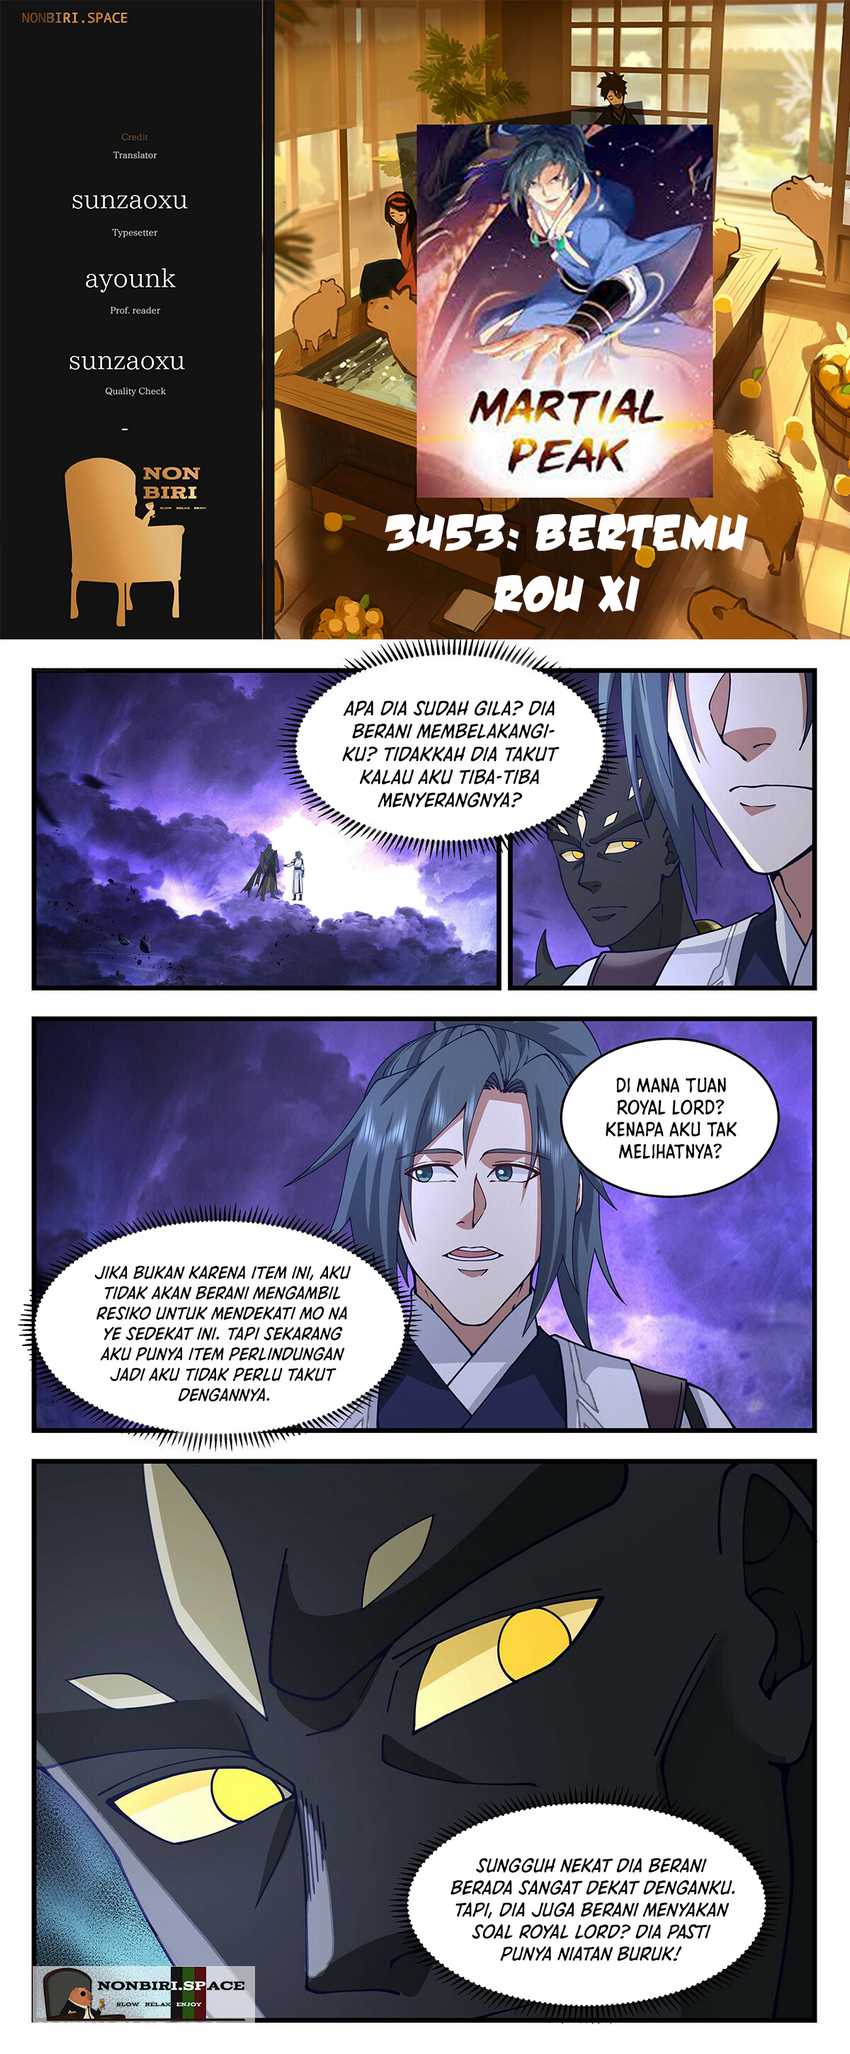 Martial Peak: Chapter 3453 - Page 1